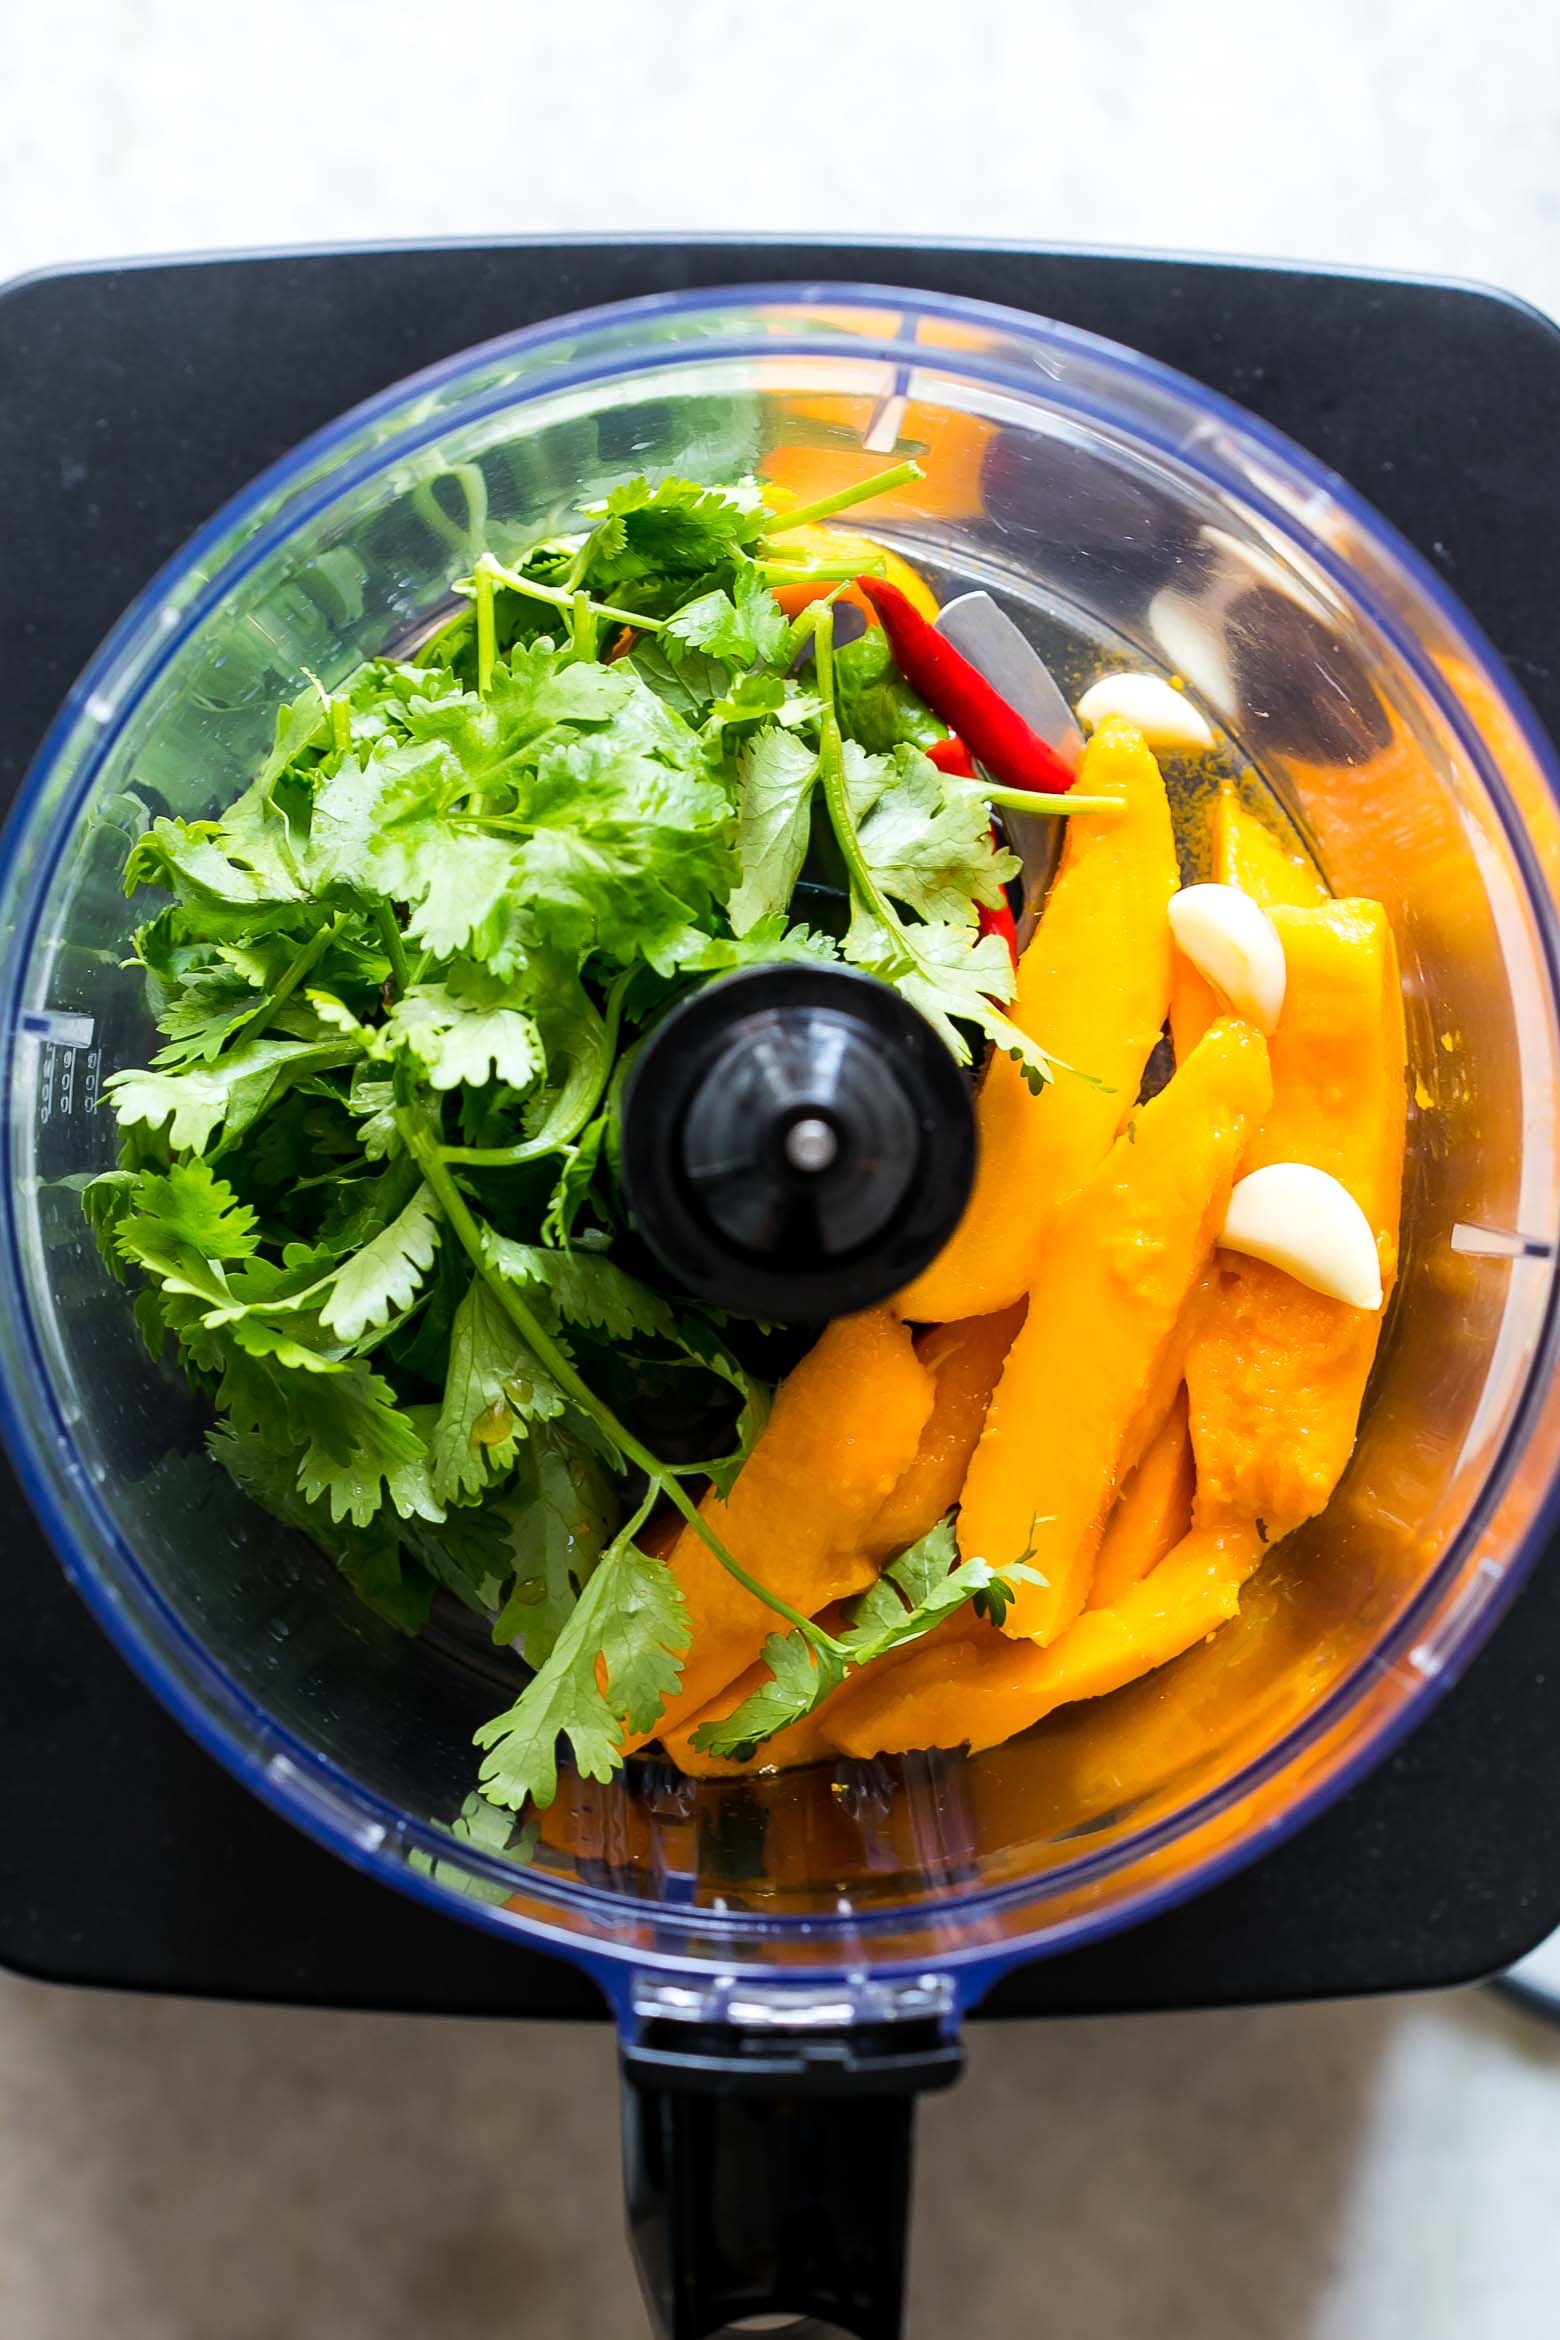 Mango Cilantro Salad Dressing is a fresh, tropical, creamy dressing that's super healthy, easily made in a blender and is gluten free. You'll want to pour it on everything!